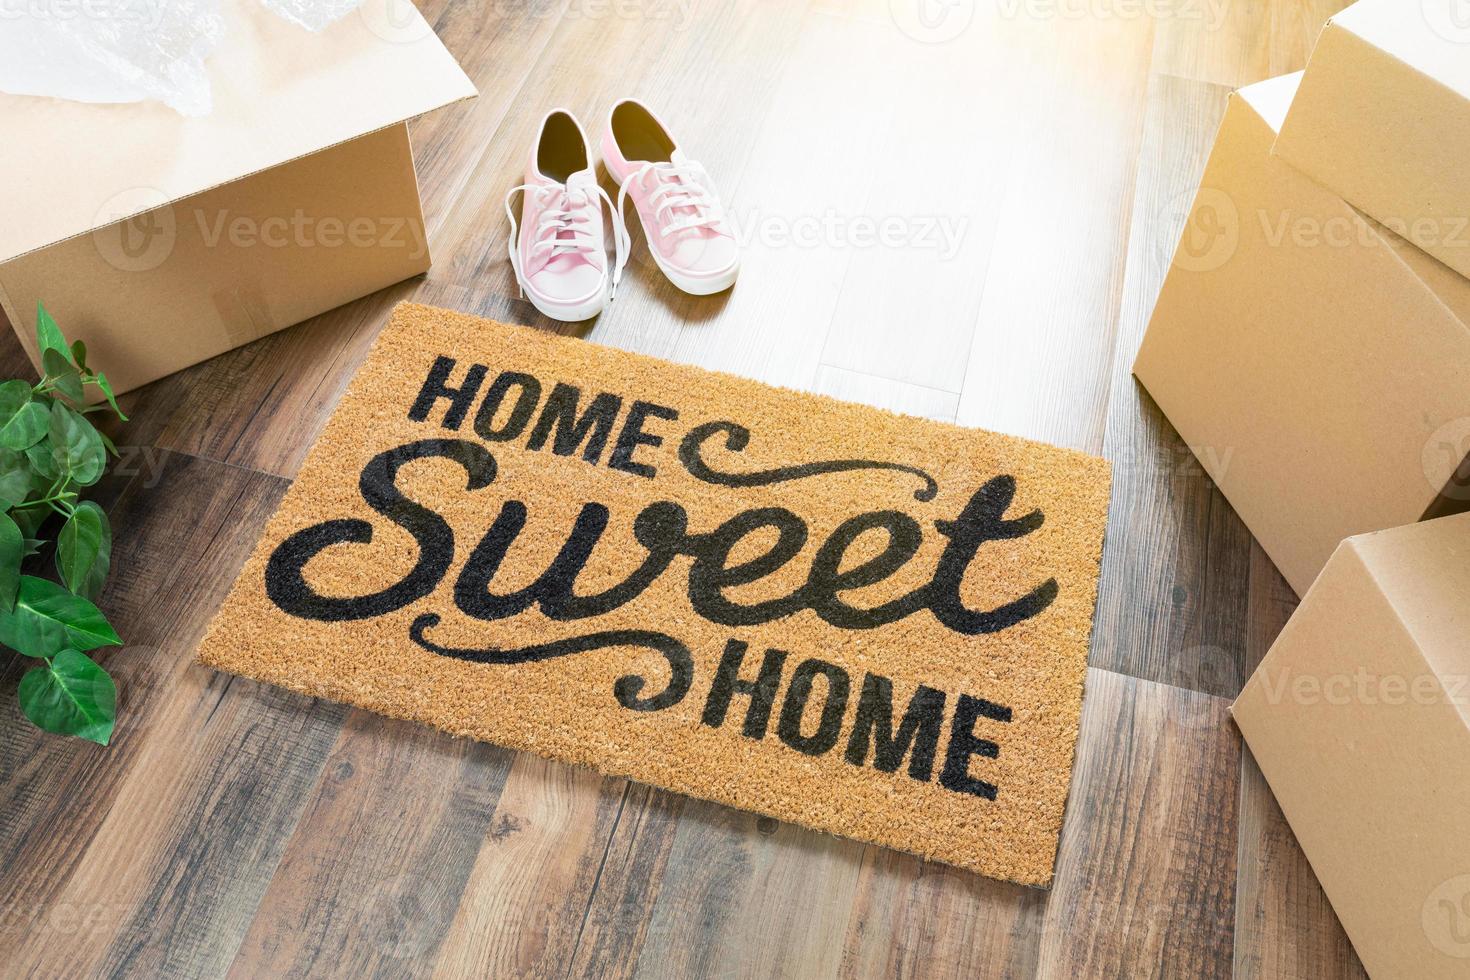 Home Sweet Home Welcome Mat, Moving Boxes, Pink Shoes and Plant on Hard Wood Floors photo